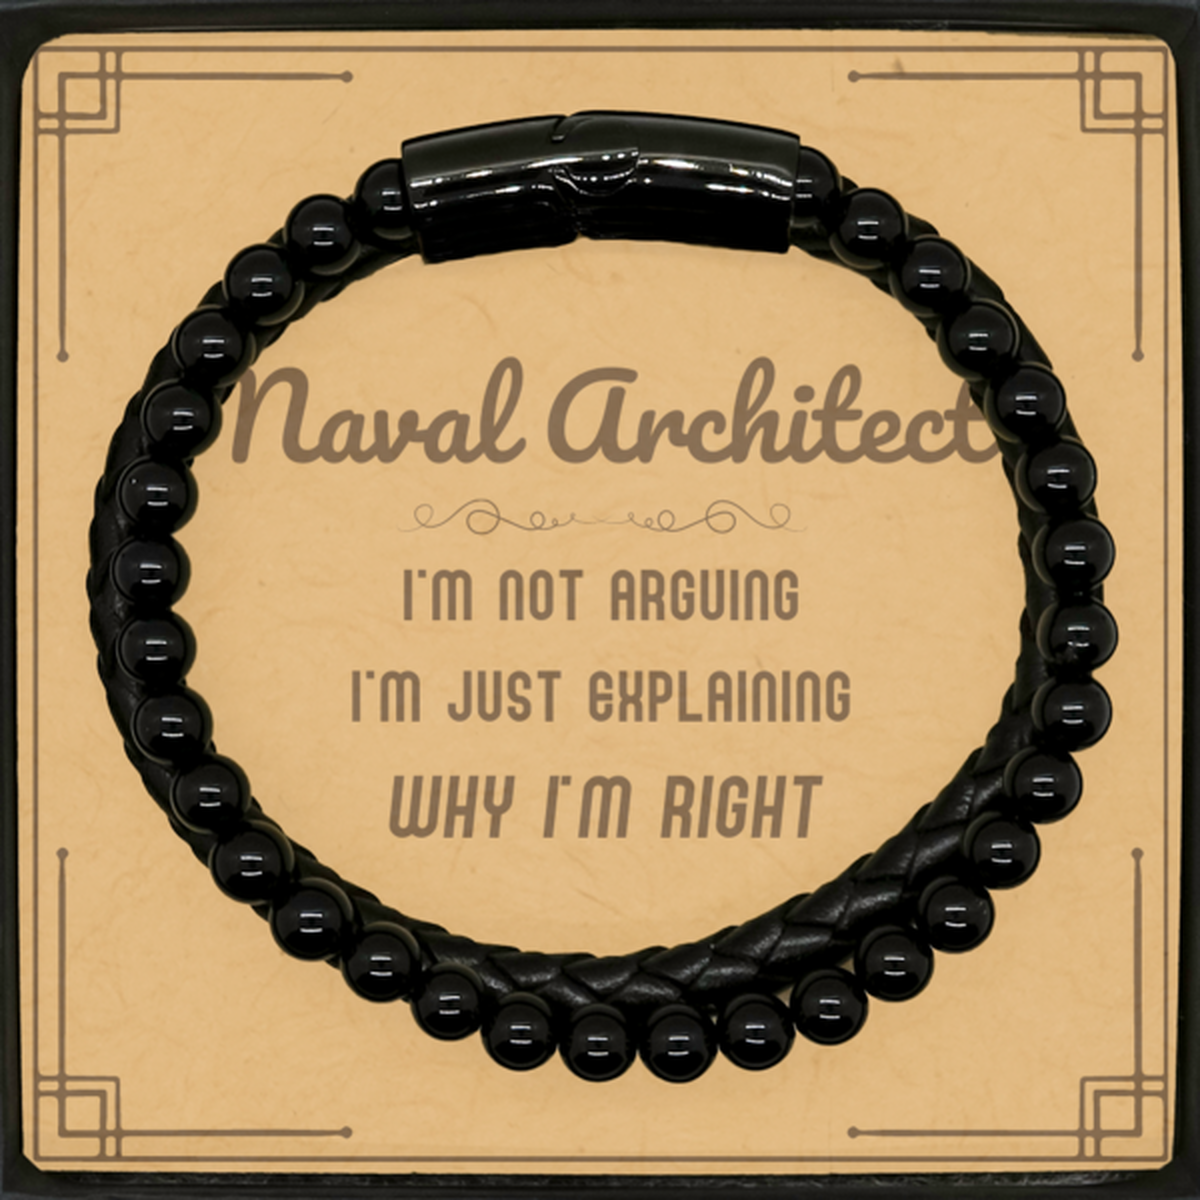 Naval Architect I'm not Arguing. I'm Just Explaining Why I'm RIGHT Stone Leather Bracelets, Funny Saying Quote Naval Architect Gifts For Naval Architect Message Card Graduation Birthday Christmas Gifts for Men Women Coworker